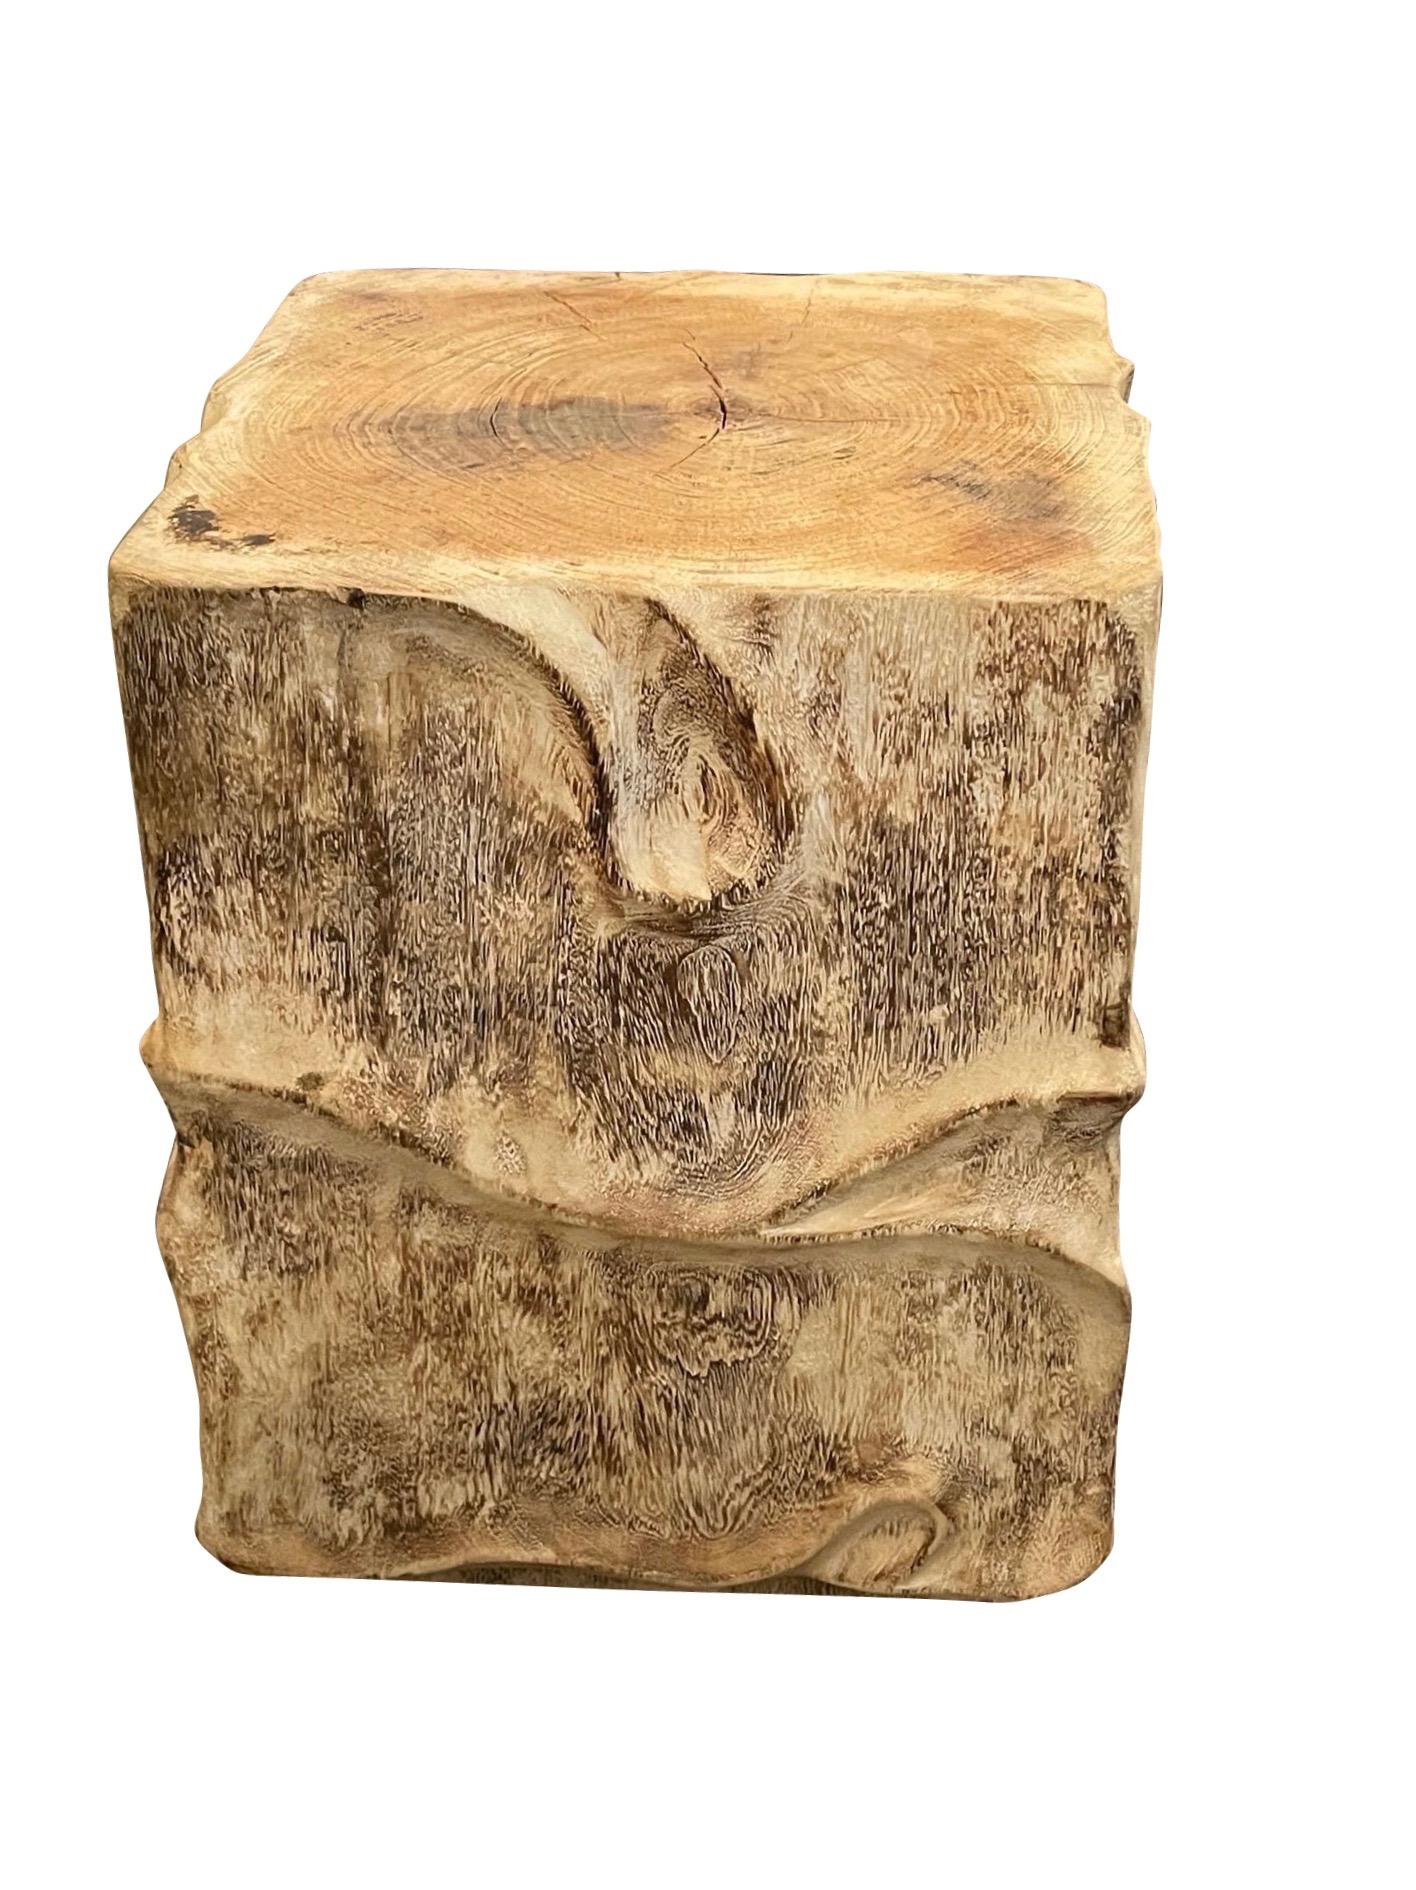 Contemporary Indonesian bleached suar wood square shaped side table.
Decorative carved sides.
Suar wood is one of the most durable hardwoods, having wavy patterns and striking grains.

